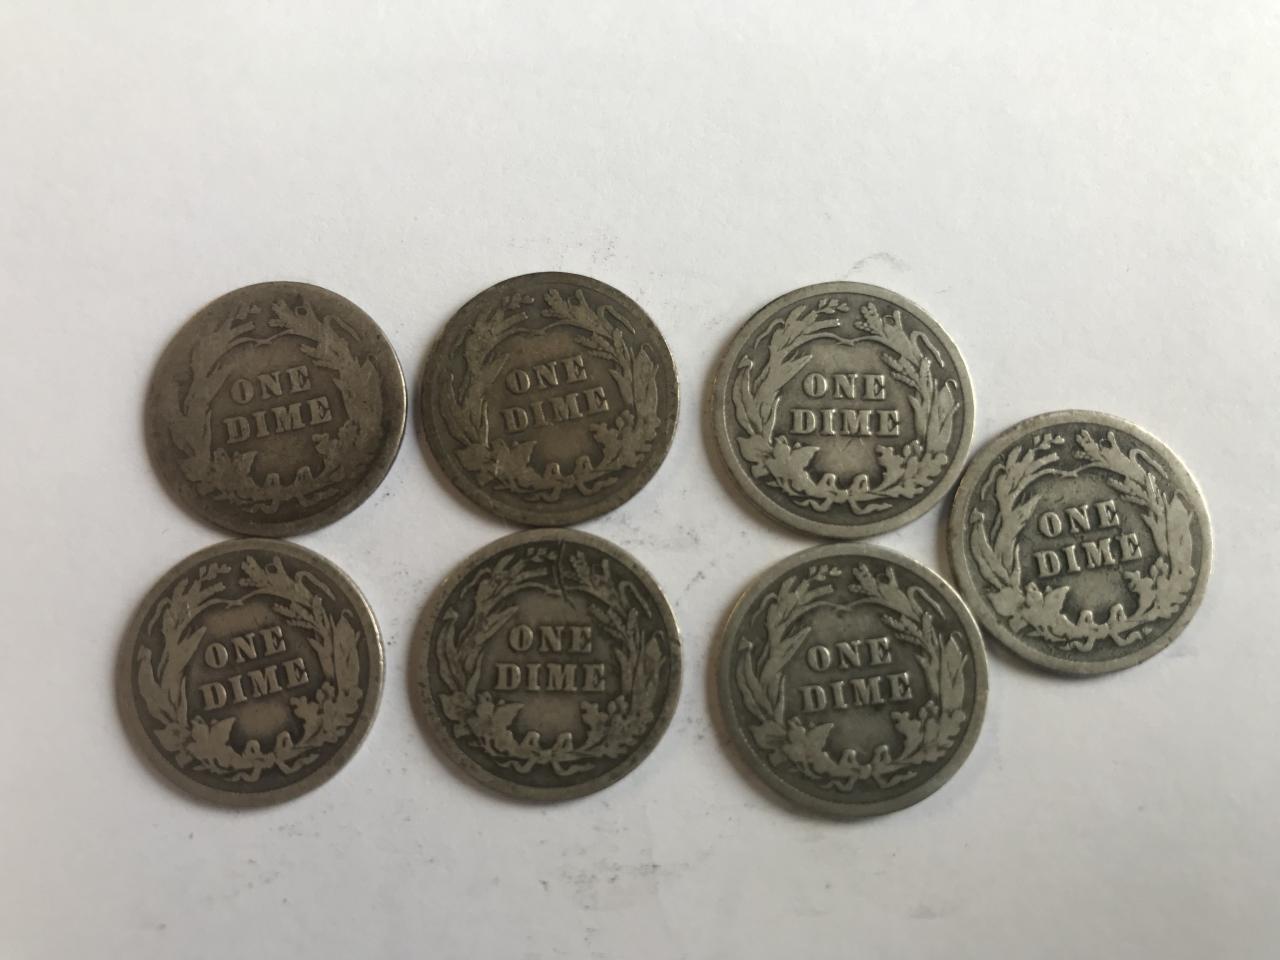 Lot of 7 .90 Silver Barber Dimes